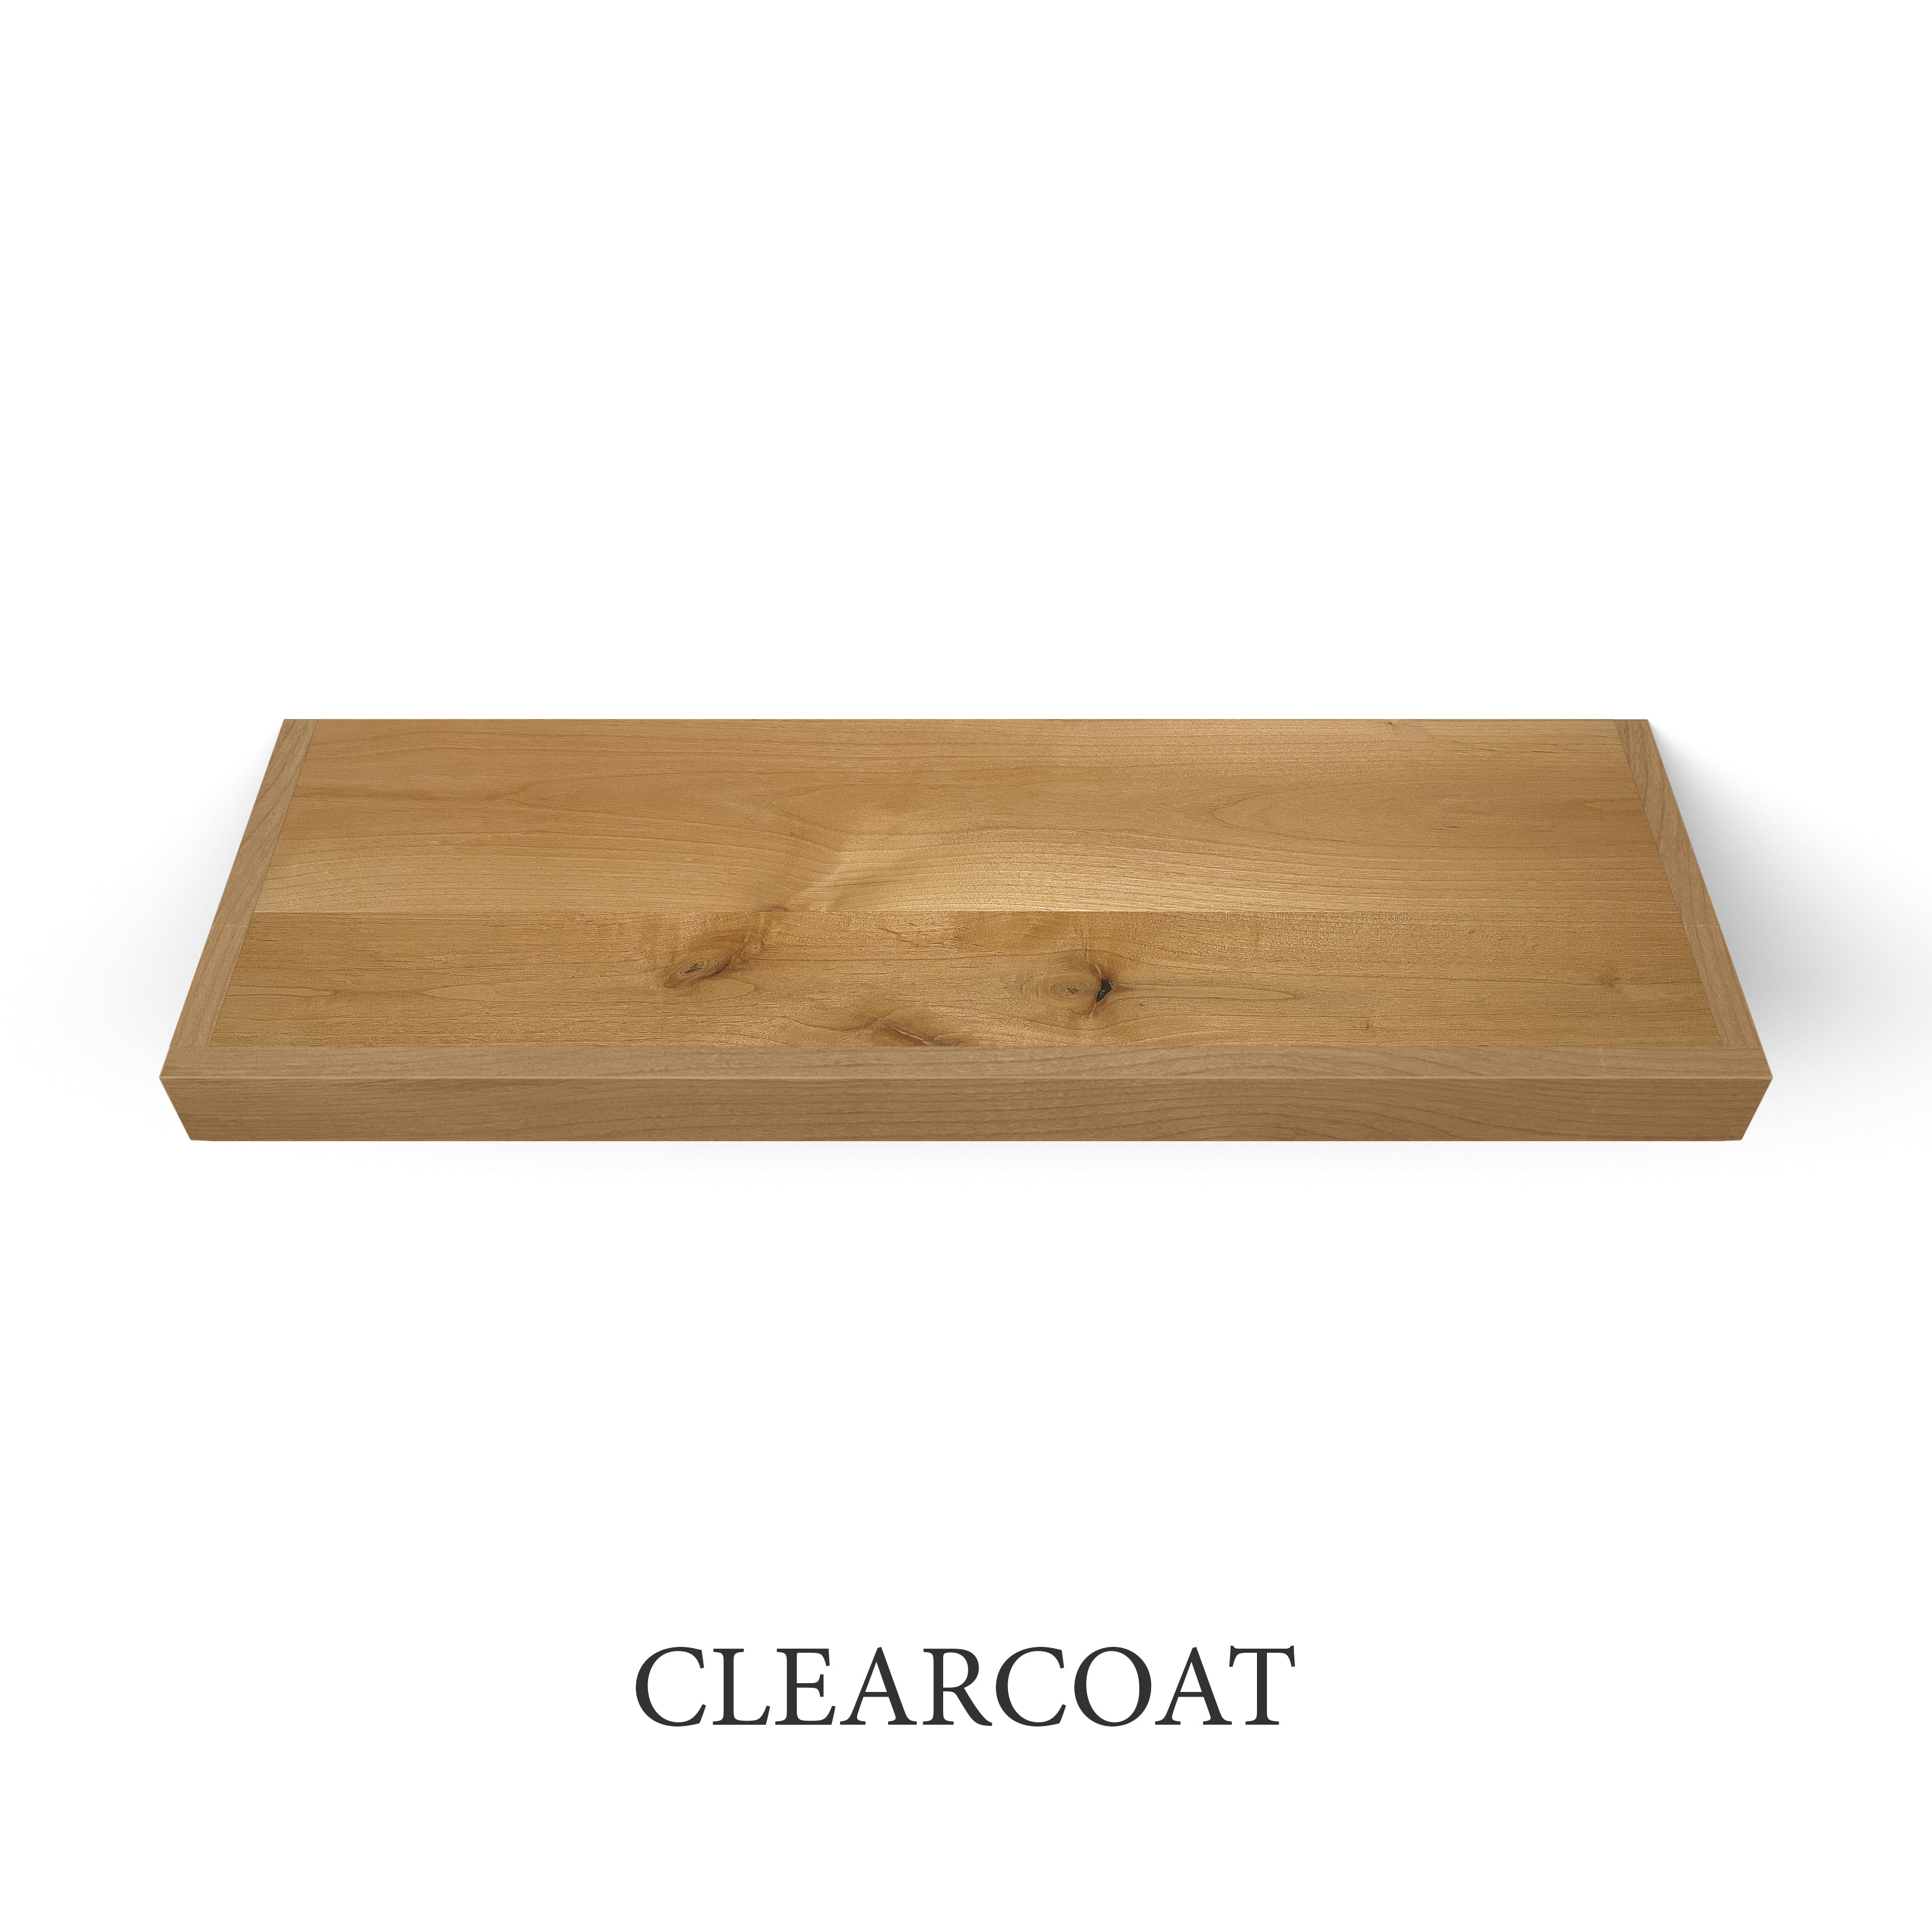 clearcoat Rustic Alder 2 Inch Thick LED Lighted Floating Shelves - Hardwired